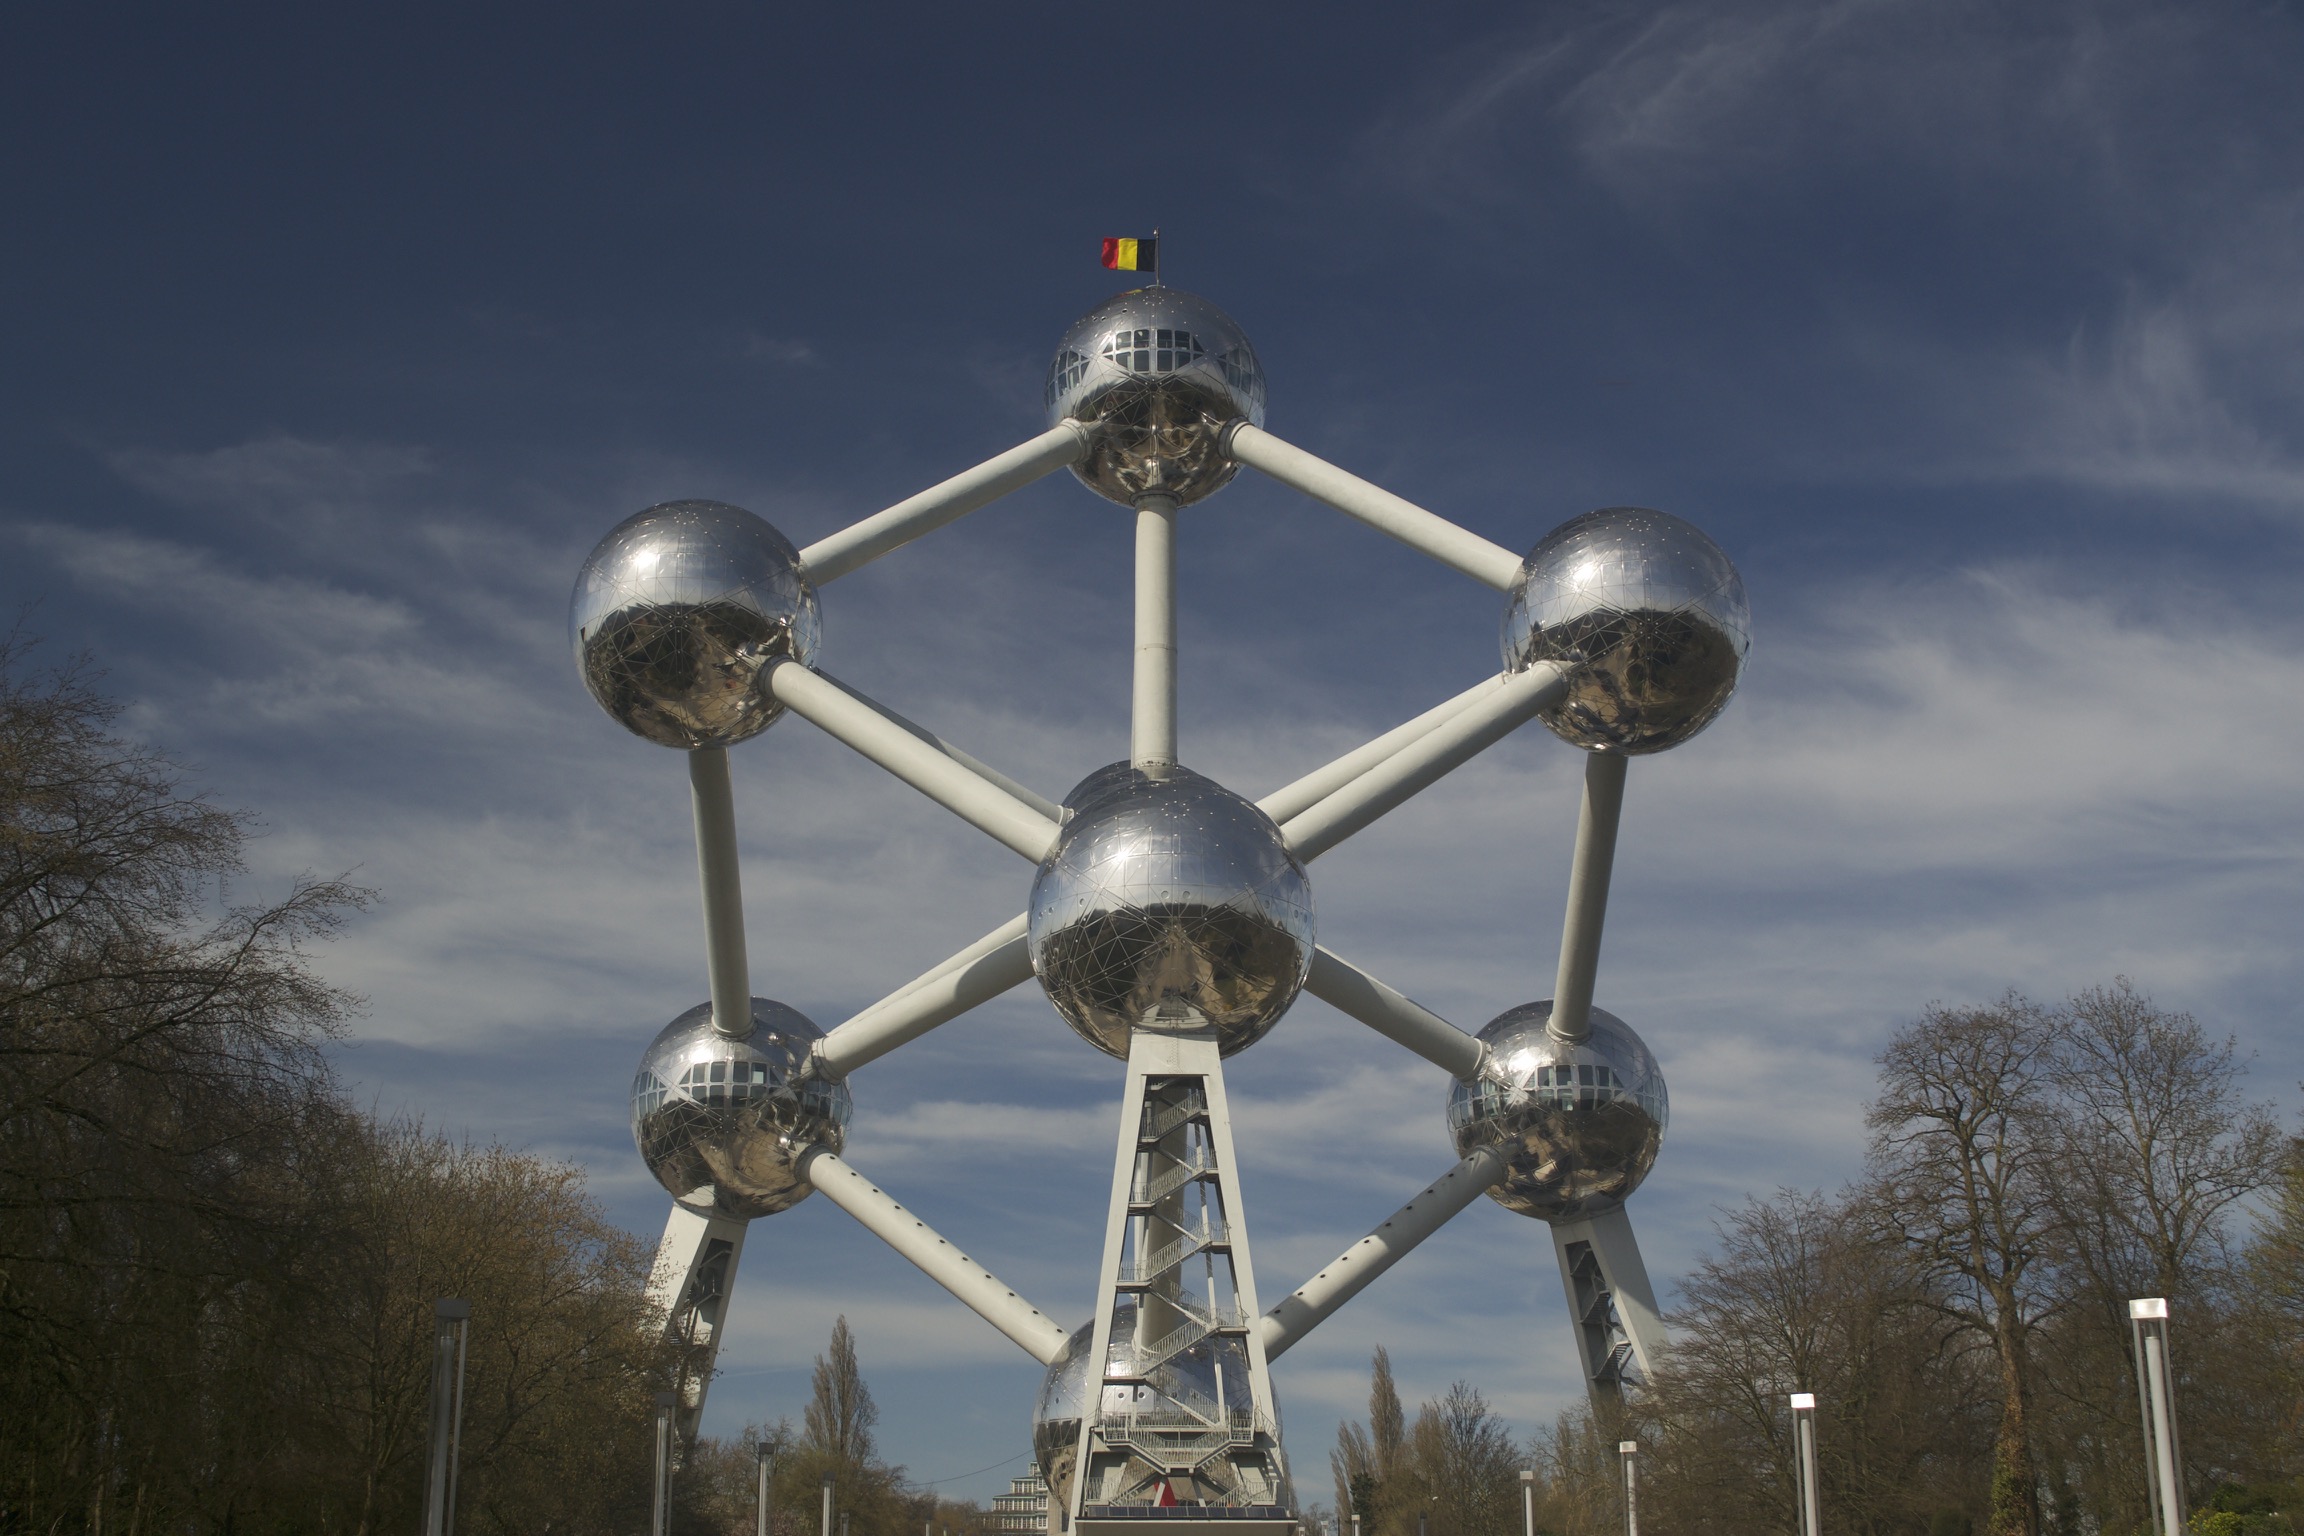 The Atomium seen from one of its cubic diagonals, revealing a hexagonal cross-section.